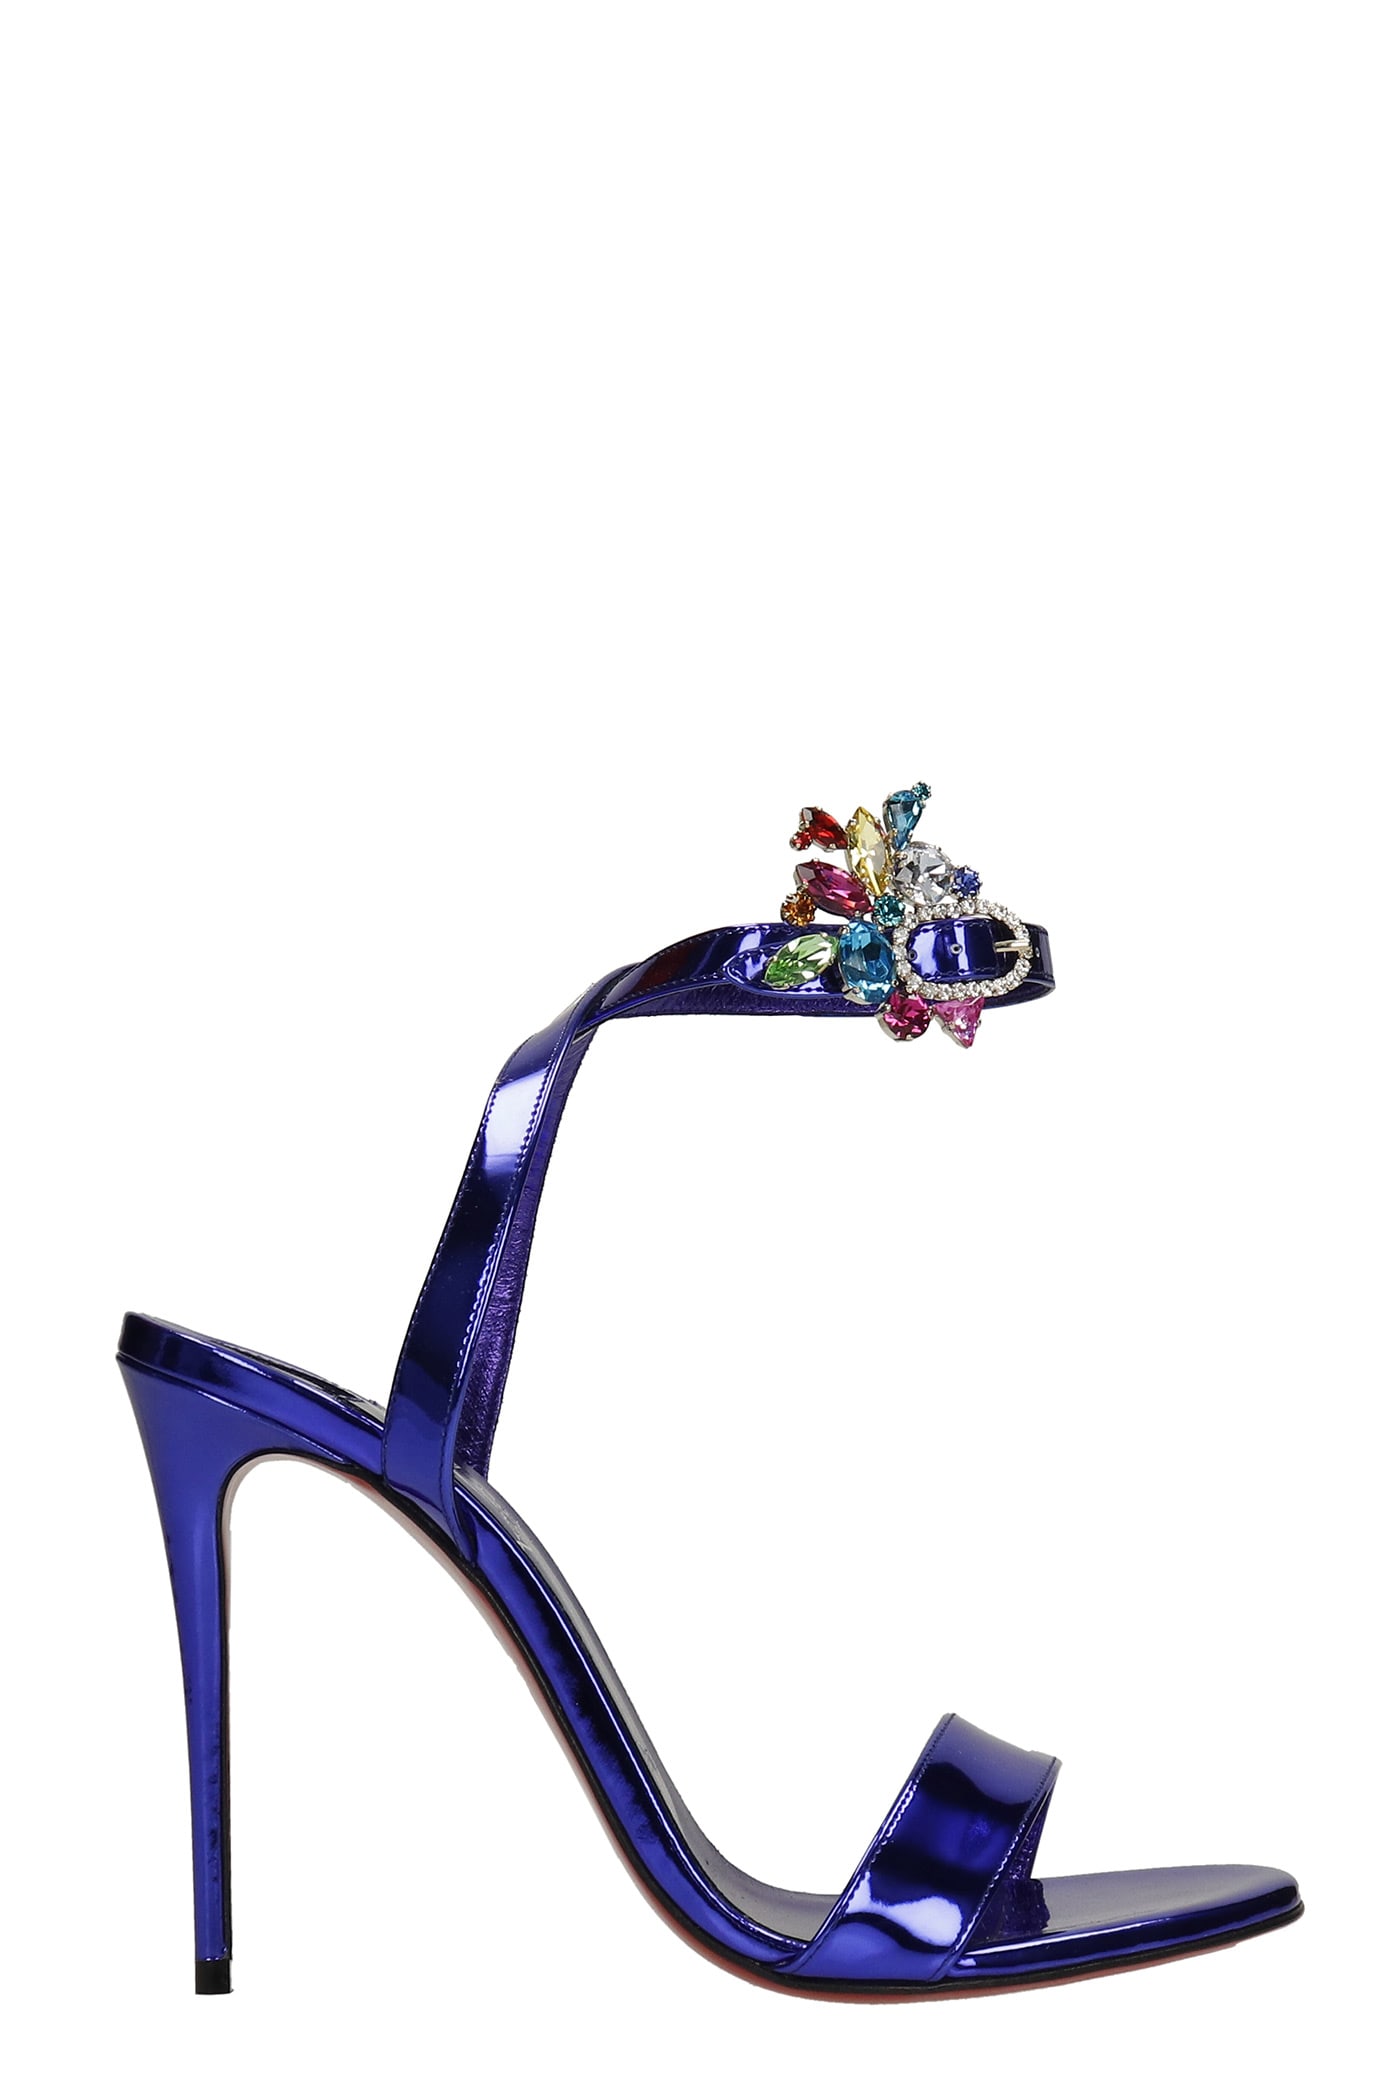 Christian Louboutin Goldie Joli 100 Sandals In Blue Leather